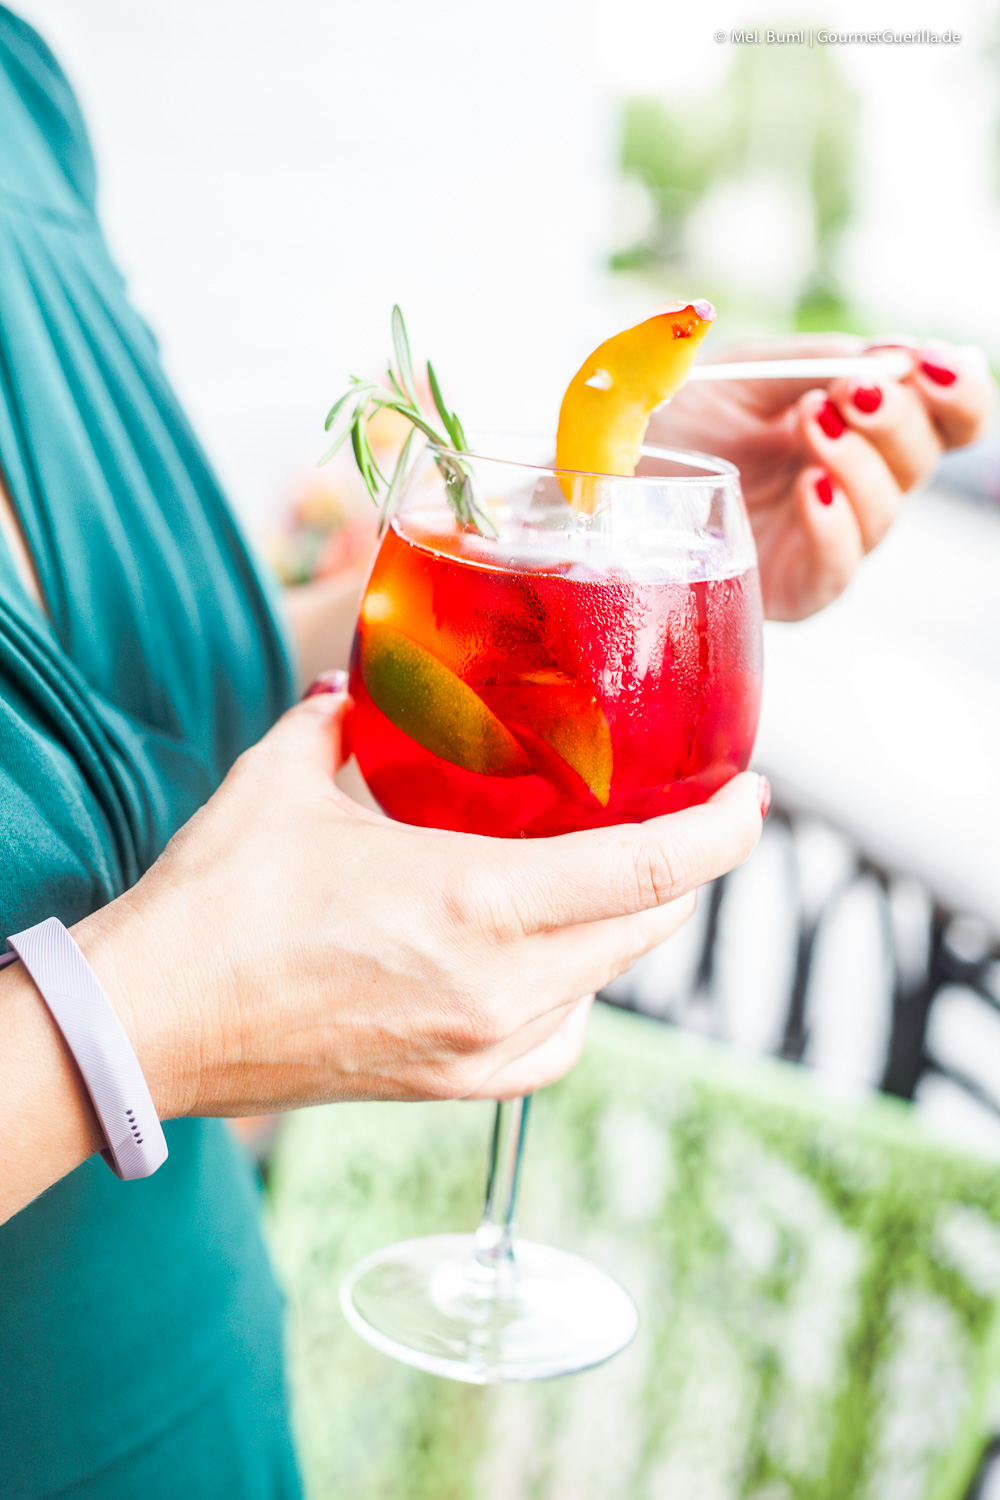 Hibiscus infused Raspberry Secco Punch with Peach and Rosemary | GourmetGuerilla.com